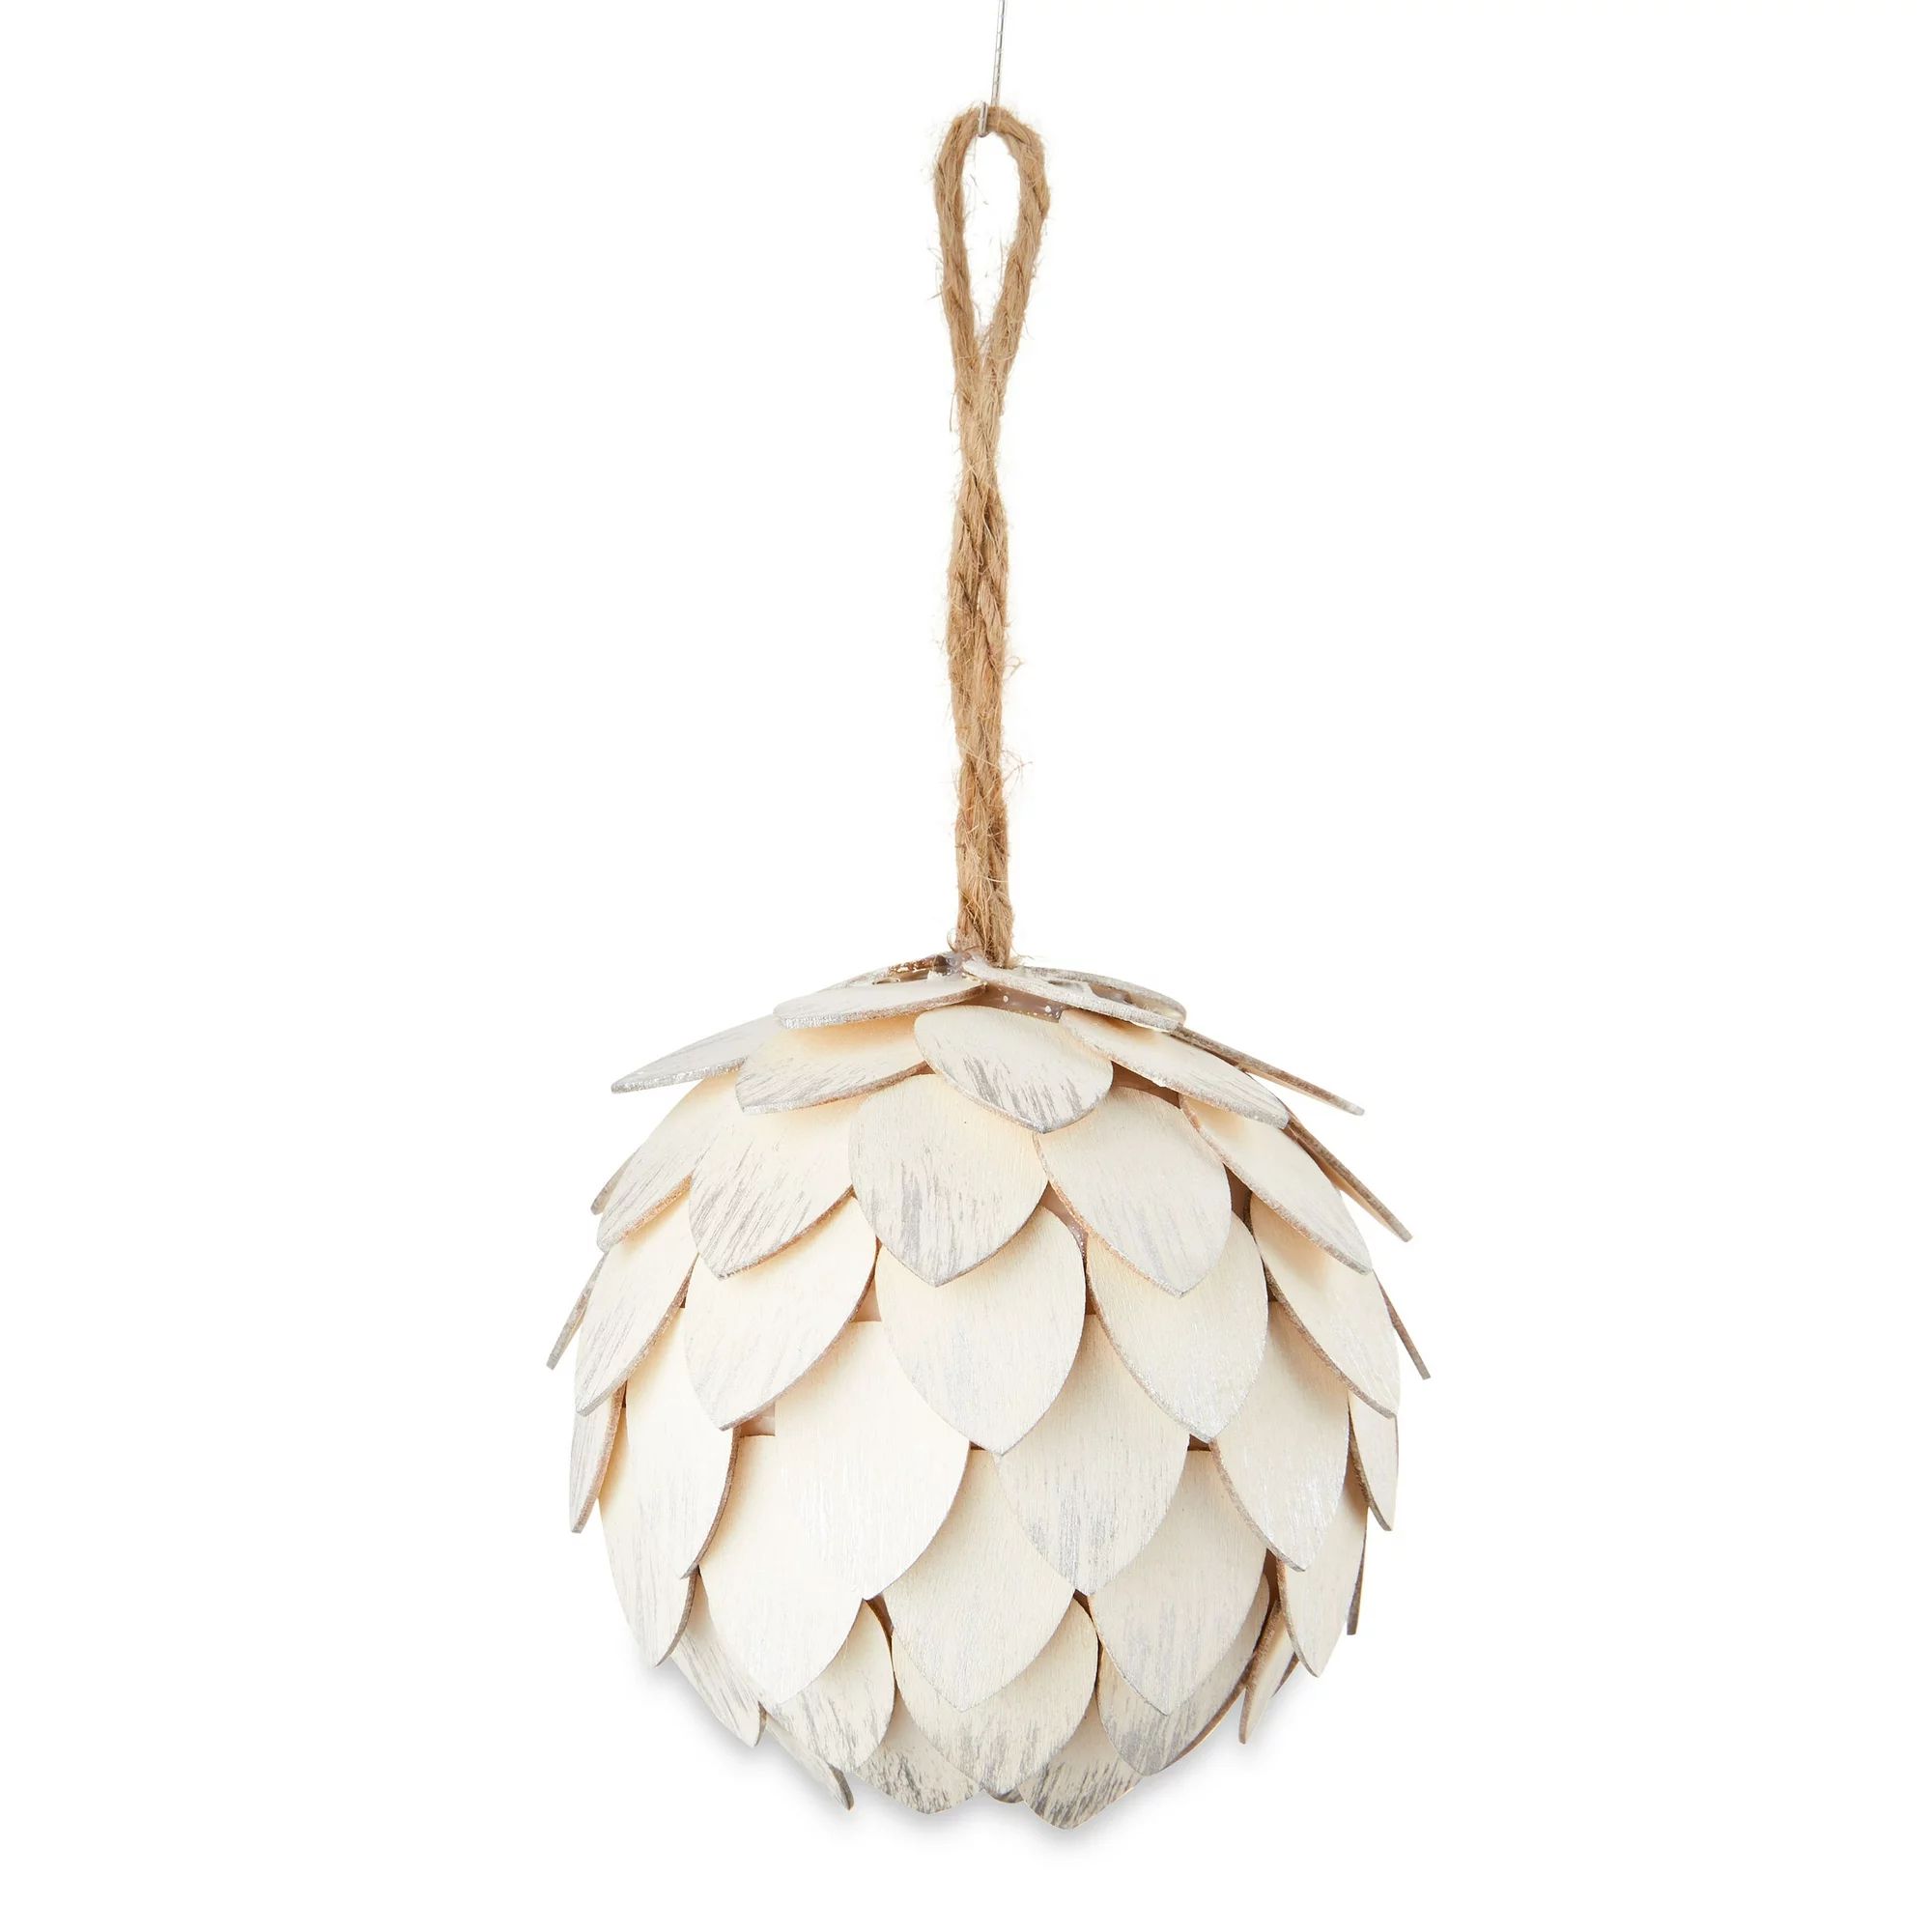 Christmas White Pinecone Hanging Ornament, 100mm, 0.05lbs, by Holiday Time | Walmart (US)